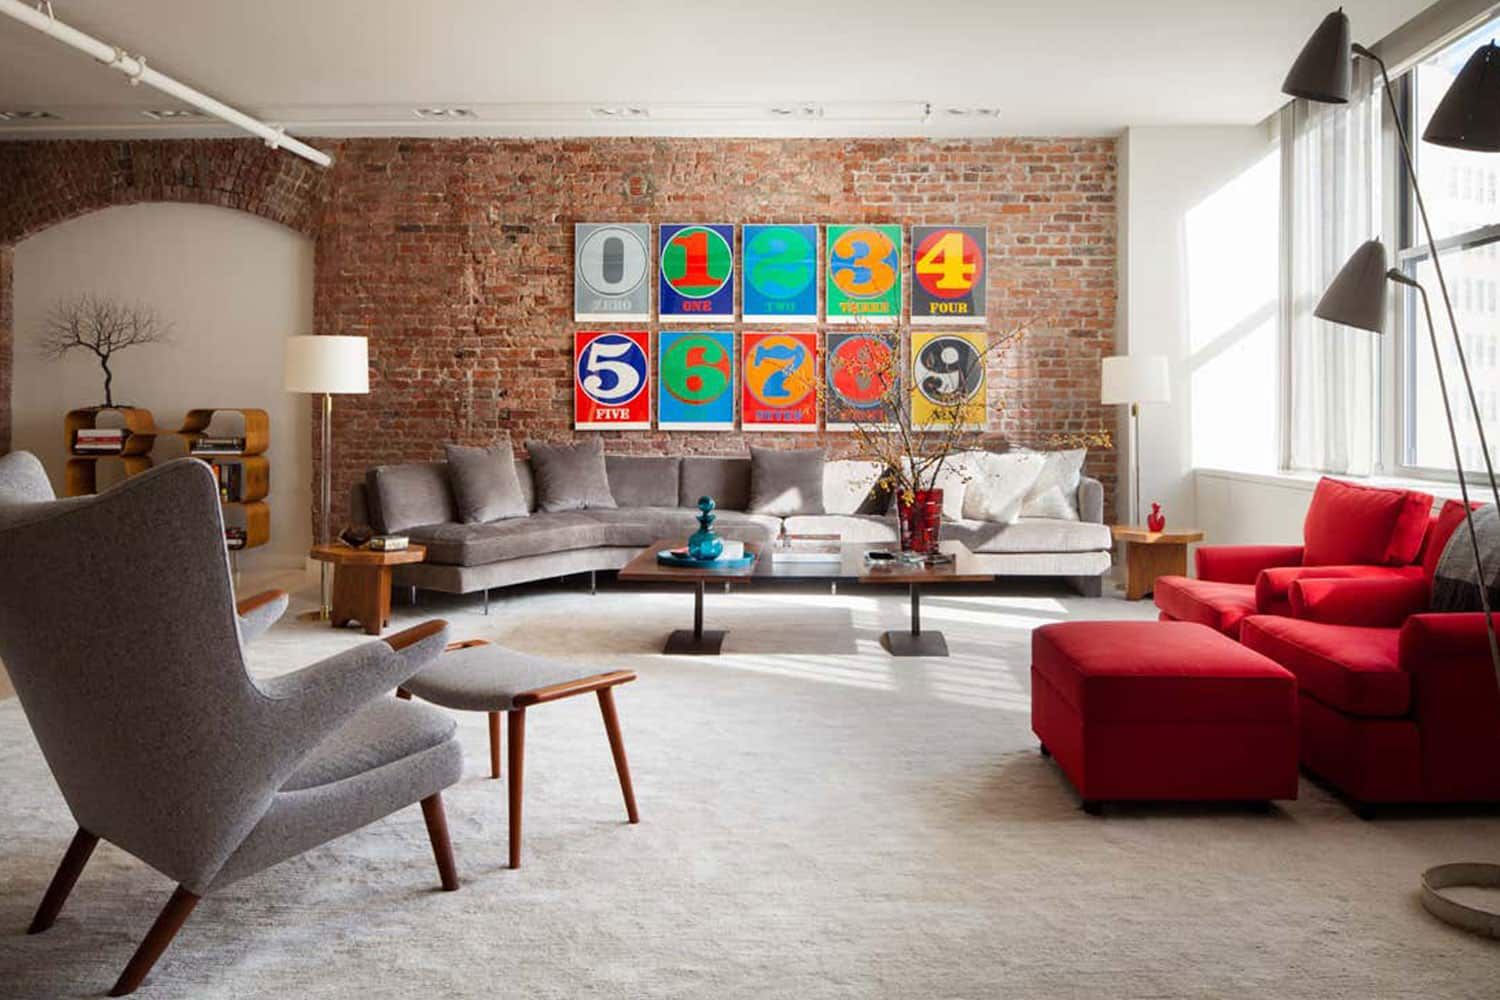 How to Arrange Wall Art: The Complete Art Placement Guide